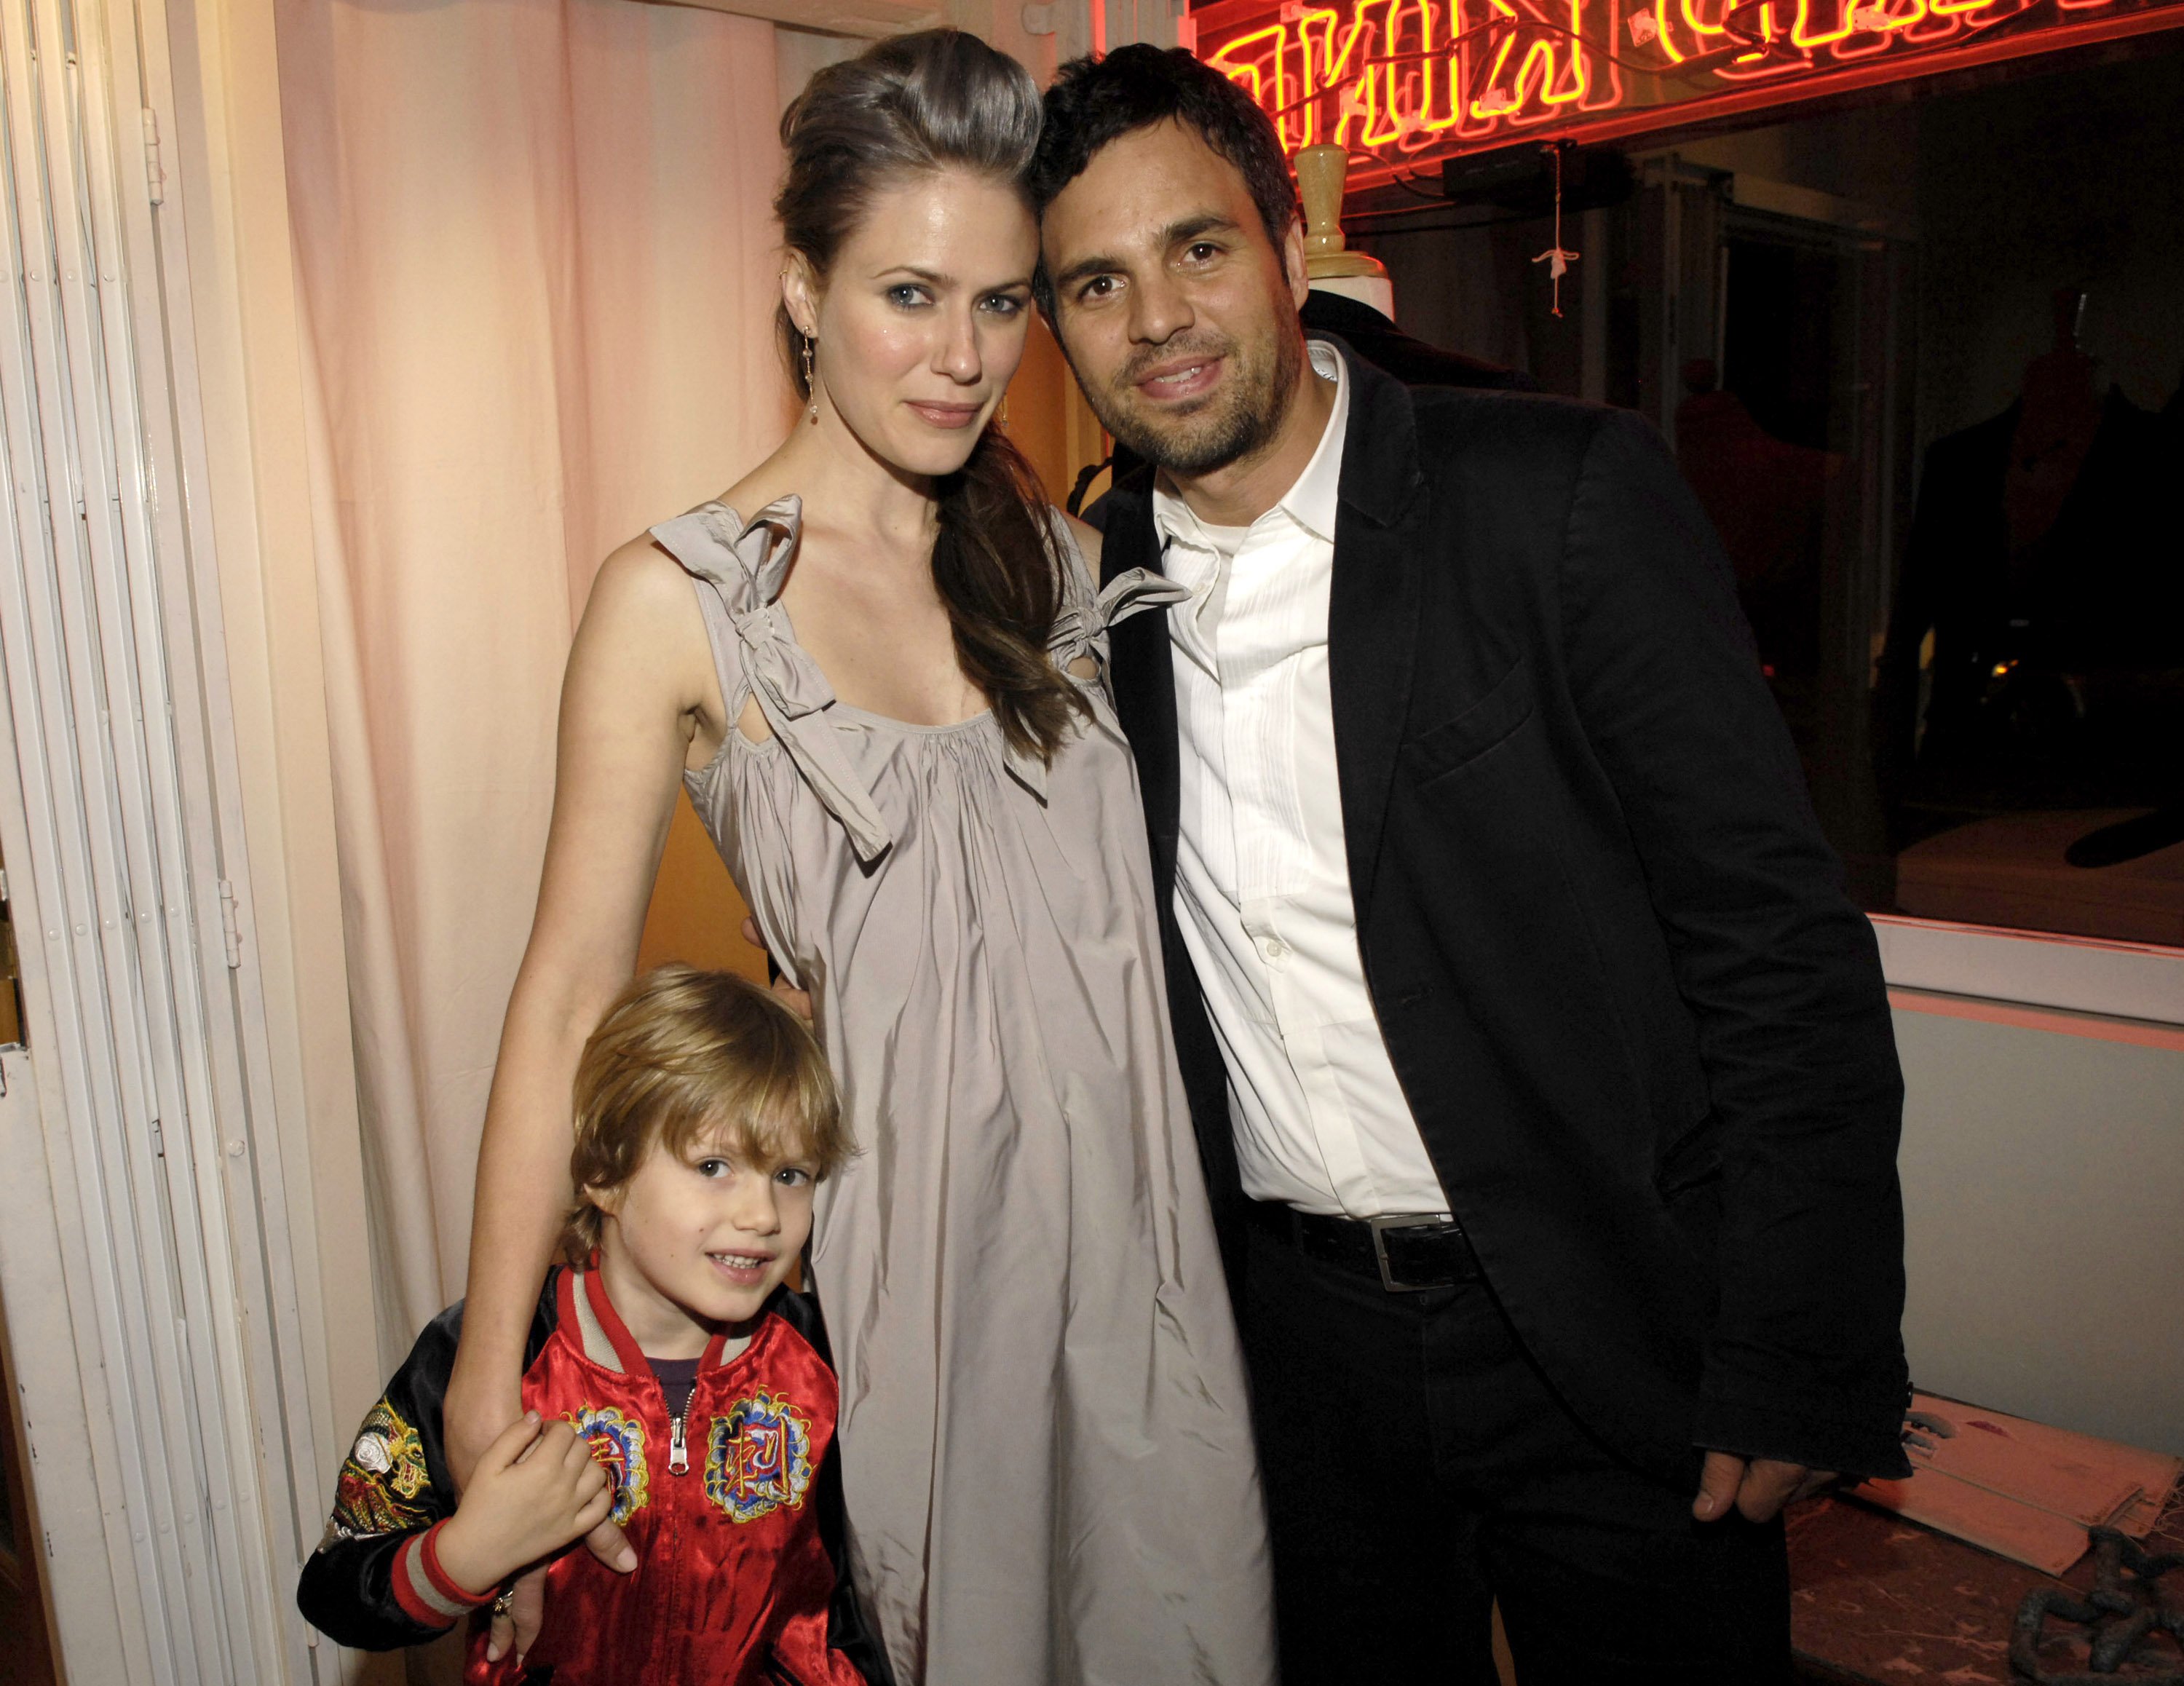 Mark Ruffaloand wife, Sunrise Ruffalo with son at the Pade Vavra Trunk Show on December 13, 2006 at Kaviar and Kind in Los Angeles, California, United States. | Source: Getty Images